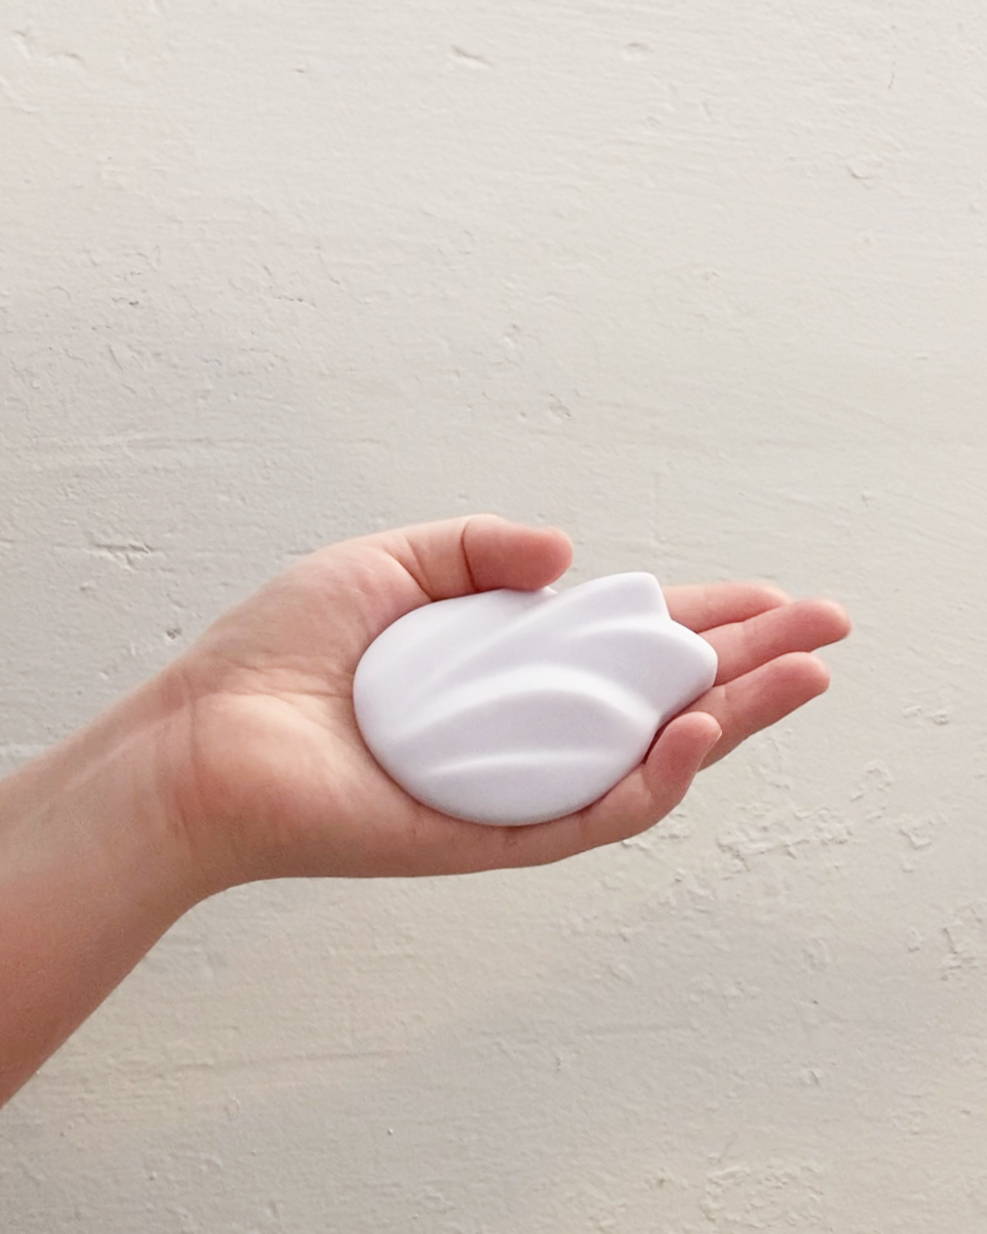 Flex in a hand, showing it's palm sized. The soft squishy silicone is perfect for those who want gentle stimulation.